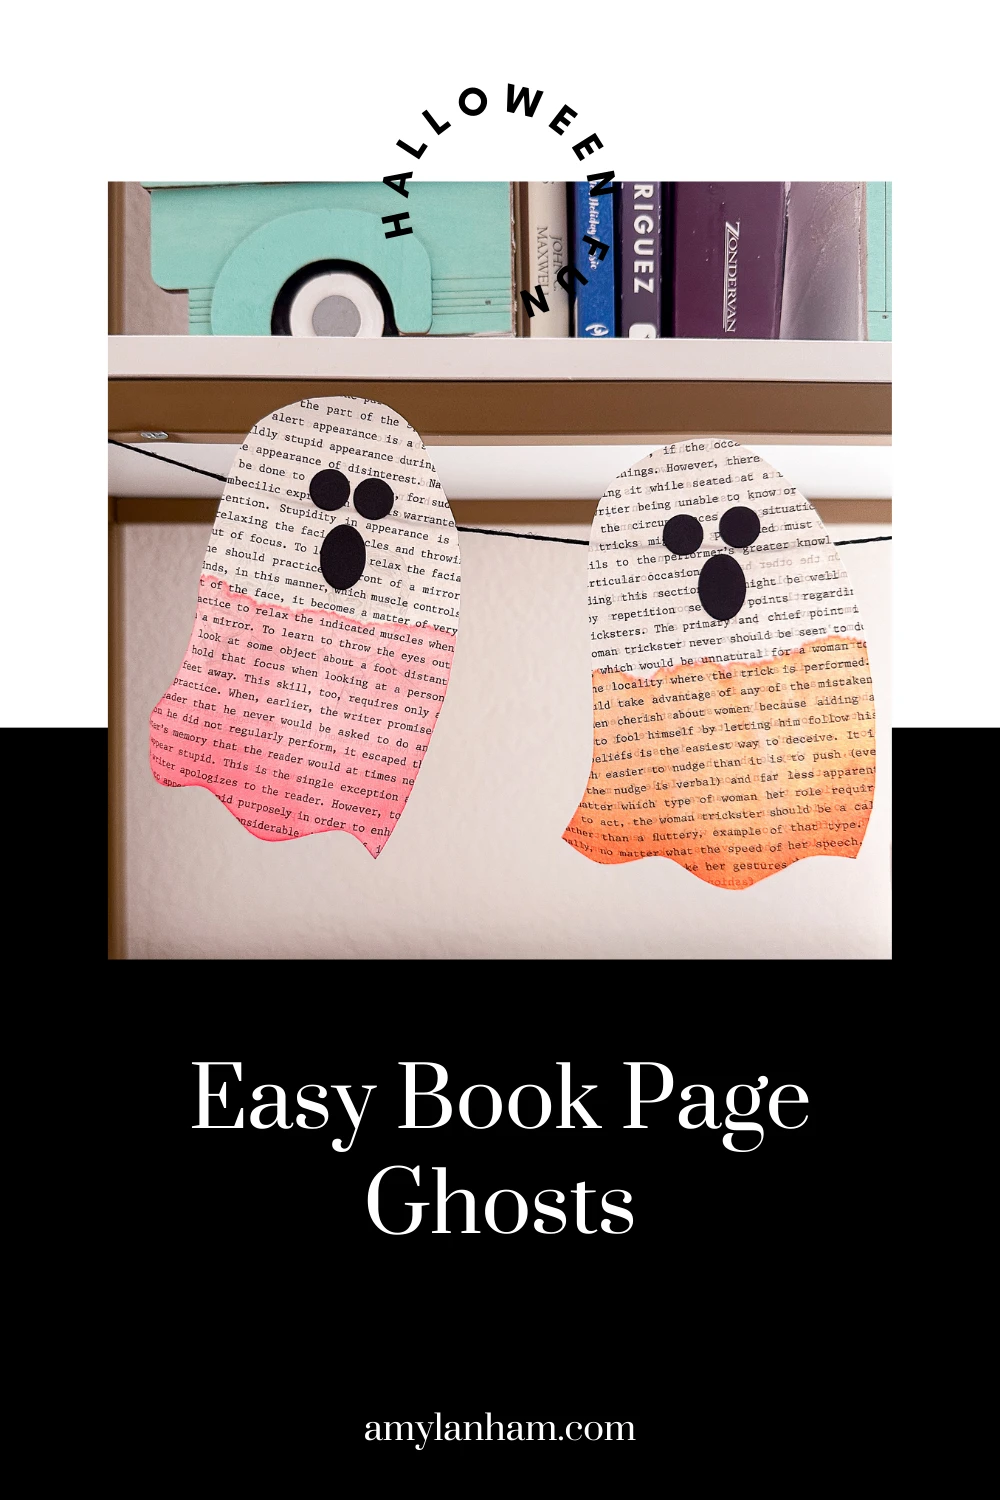 2 book page ghosts with their bottom halves painted, one red, one orange.